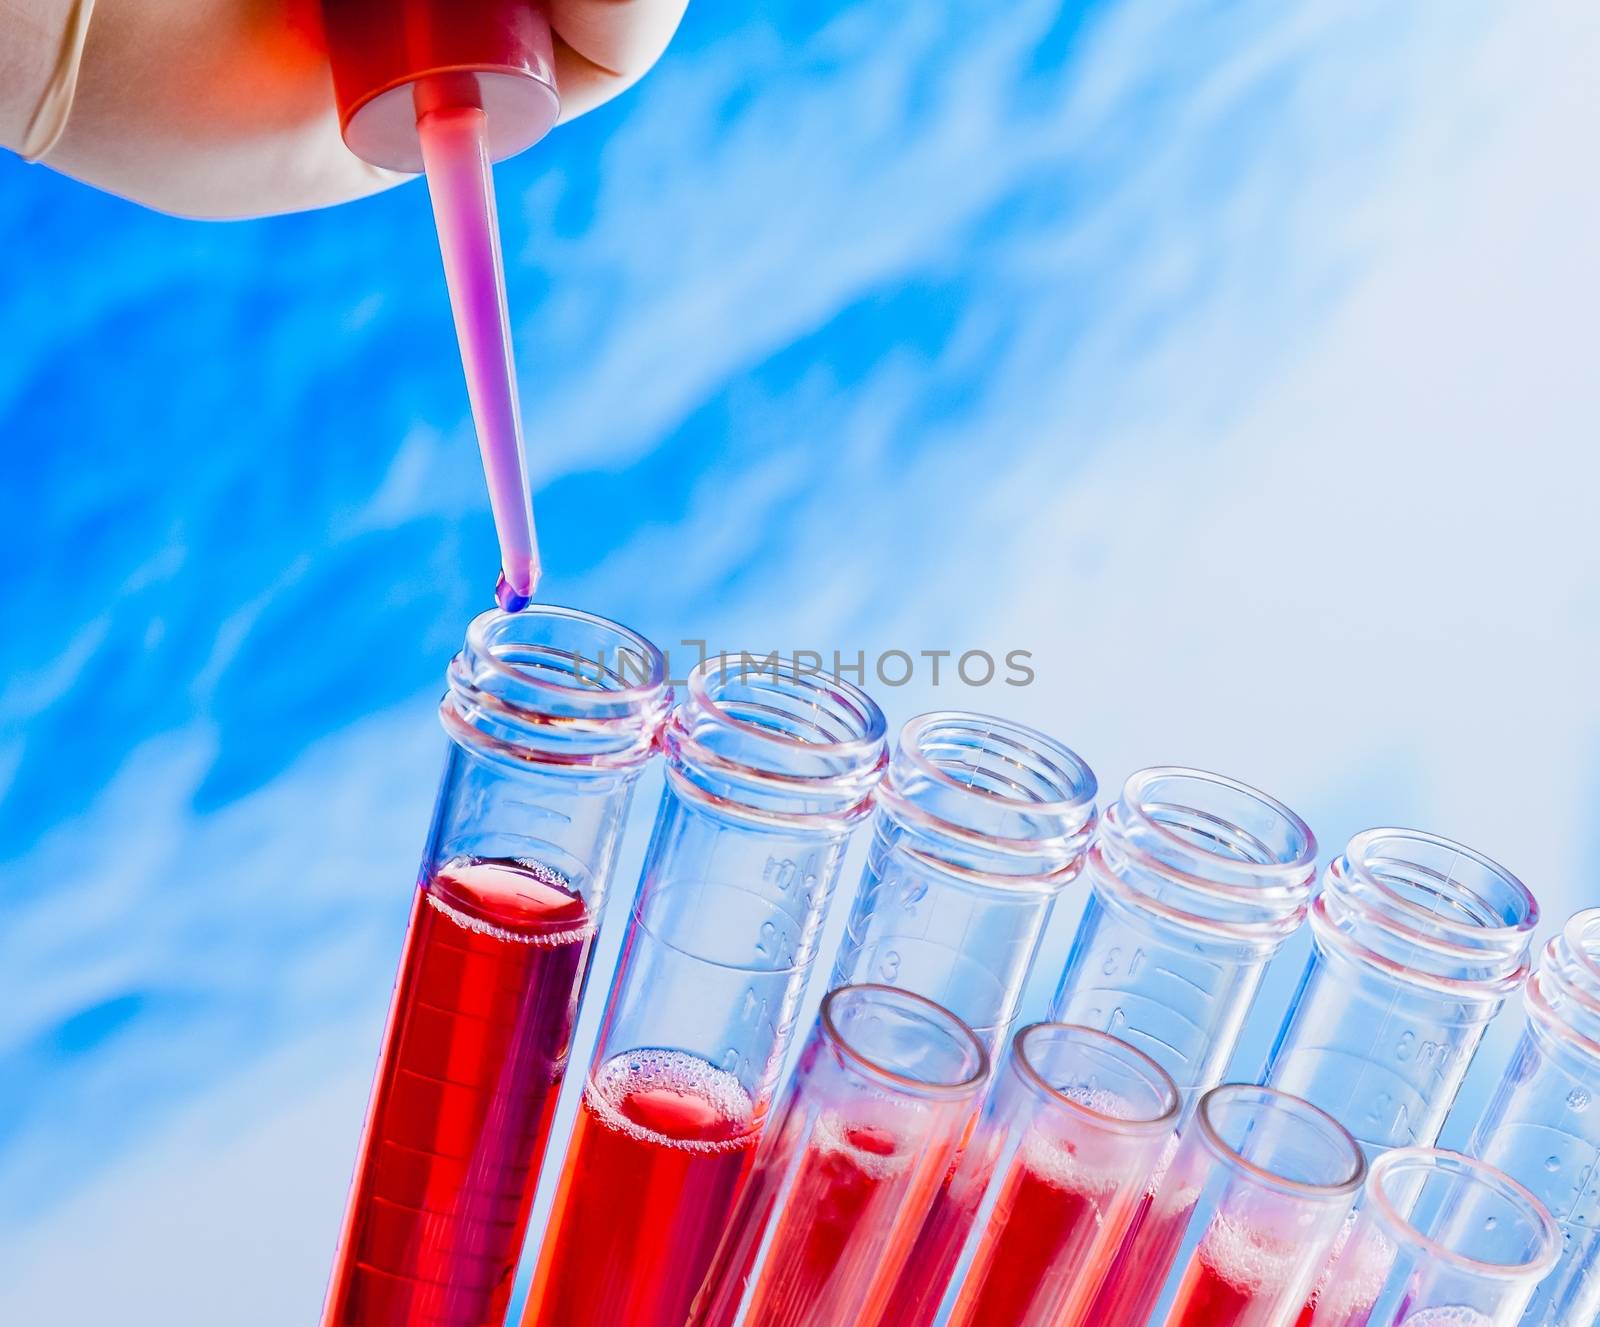 closeup of test tubes with pipette on red liquid on blue blur abstract background